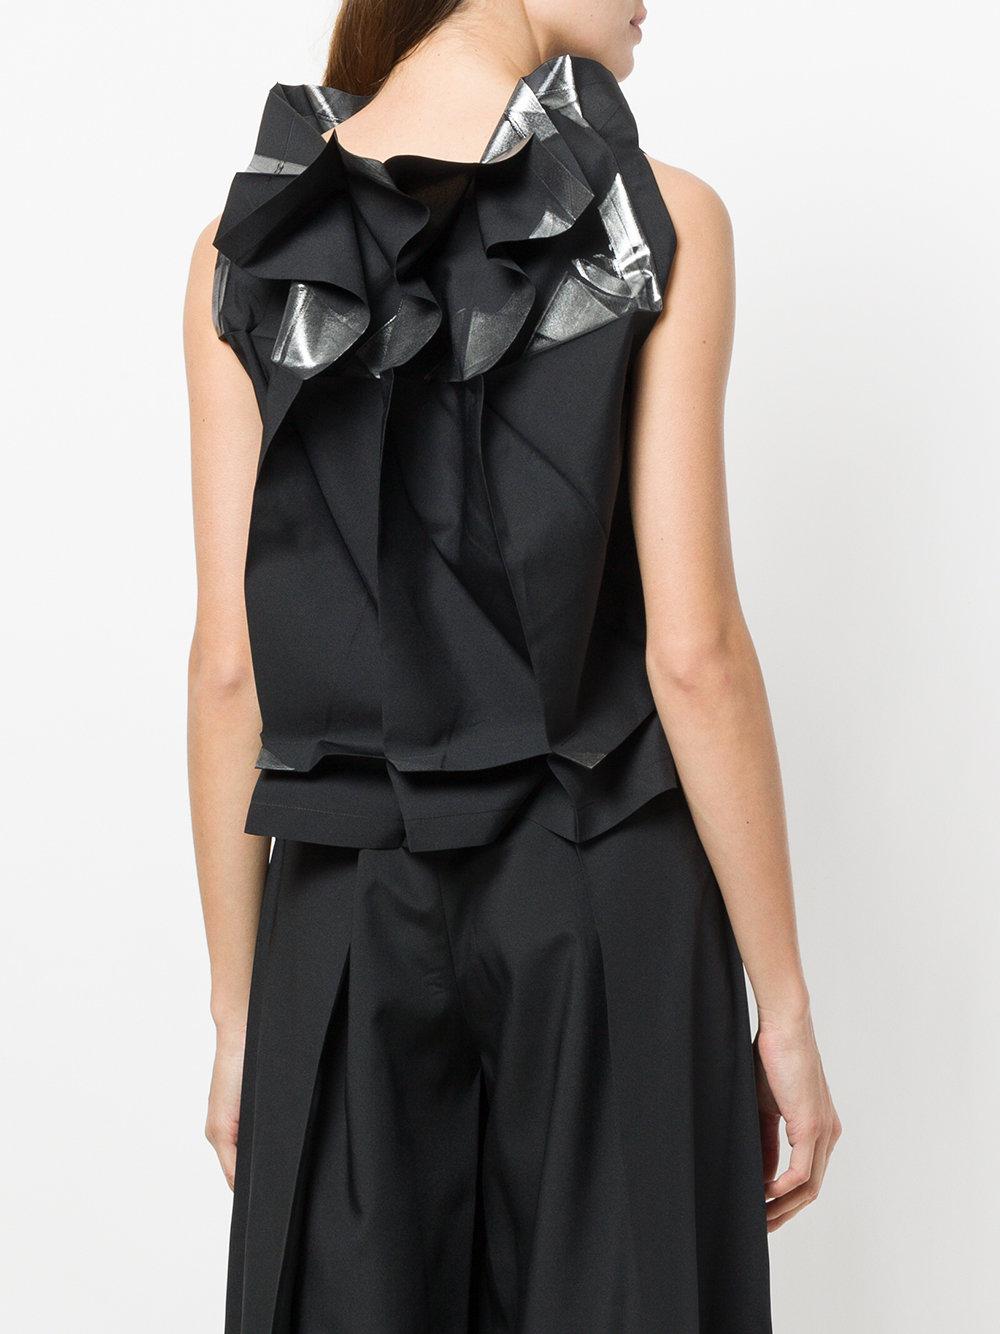 Issey Miyake Structured Fold Detail Blouse in Black - Lyst